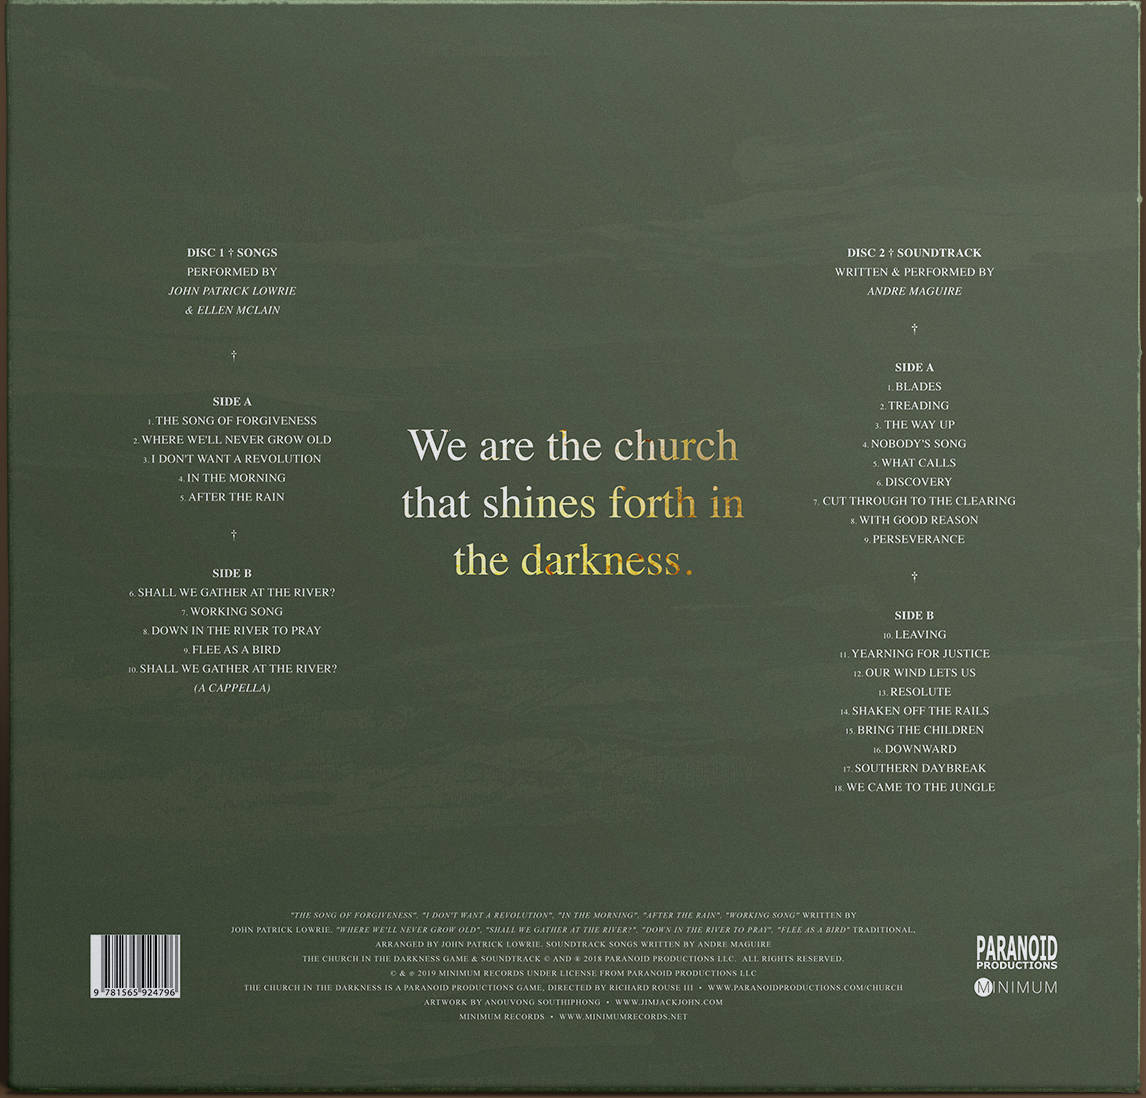 The Church in the Darkness Vinyl Cover